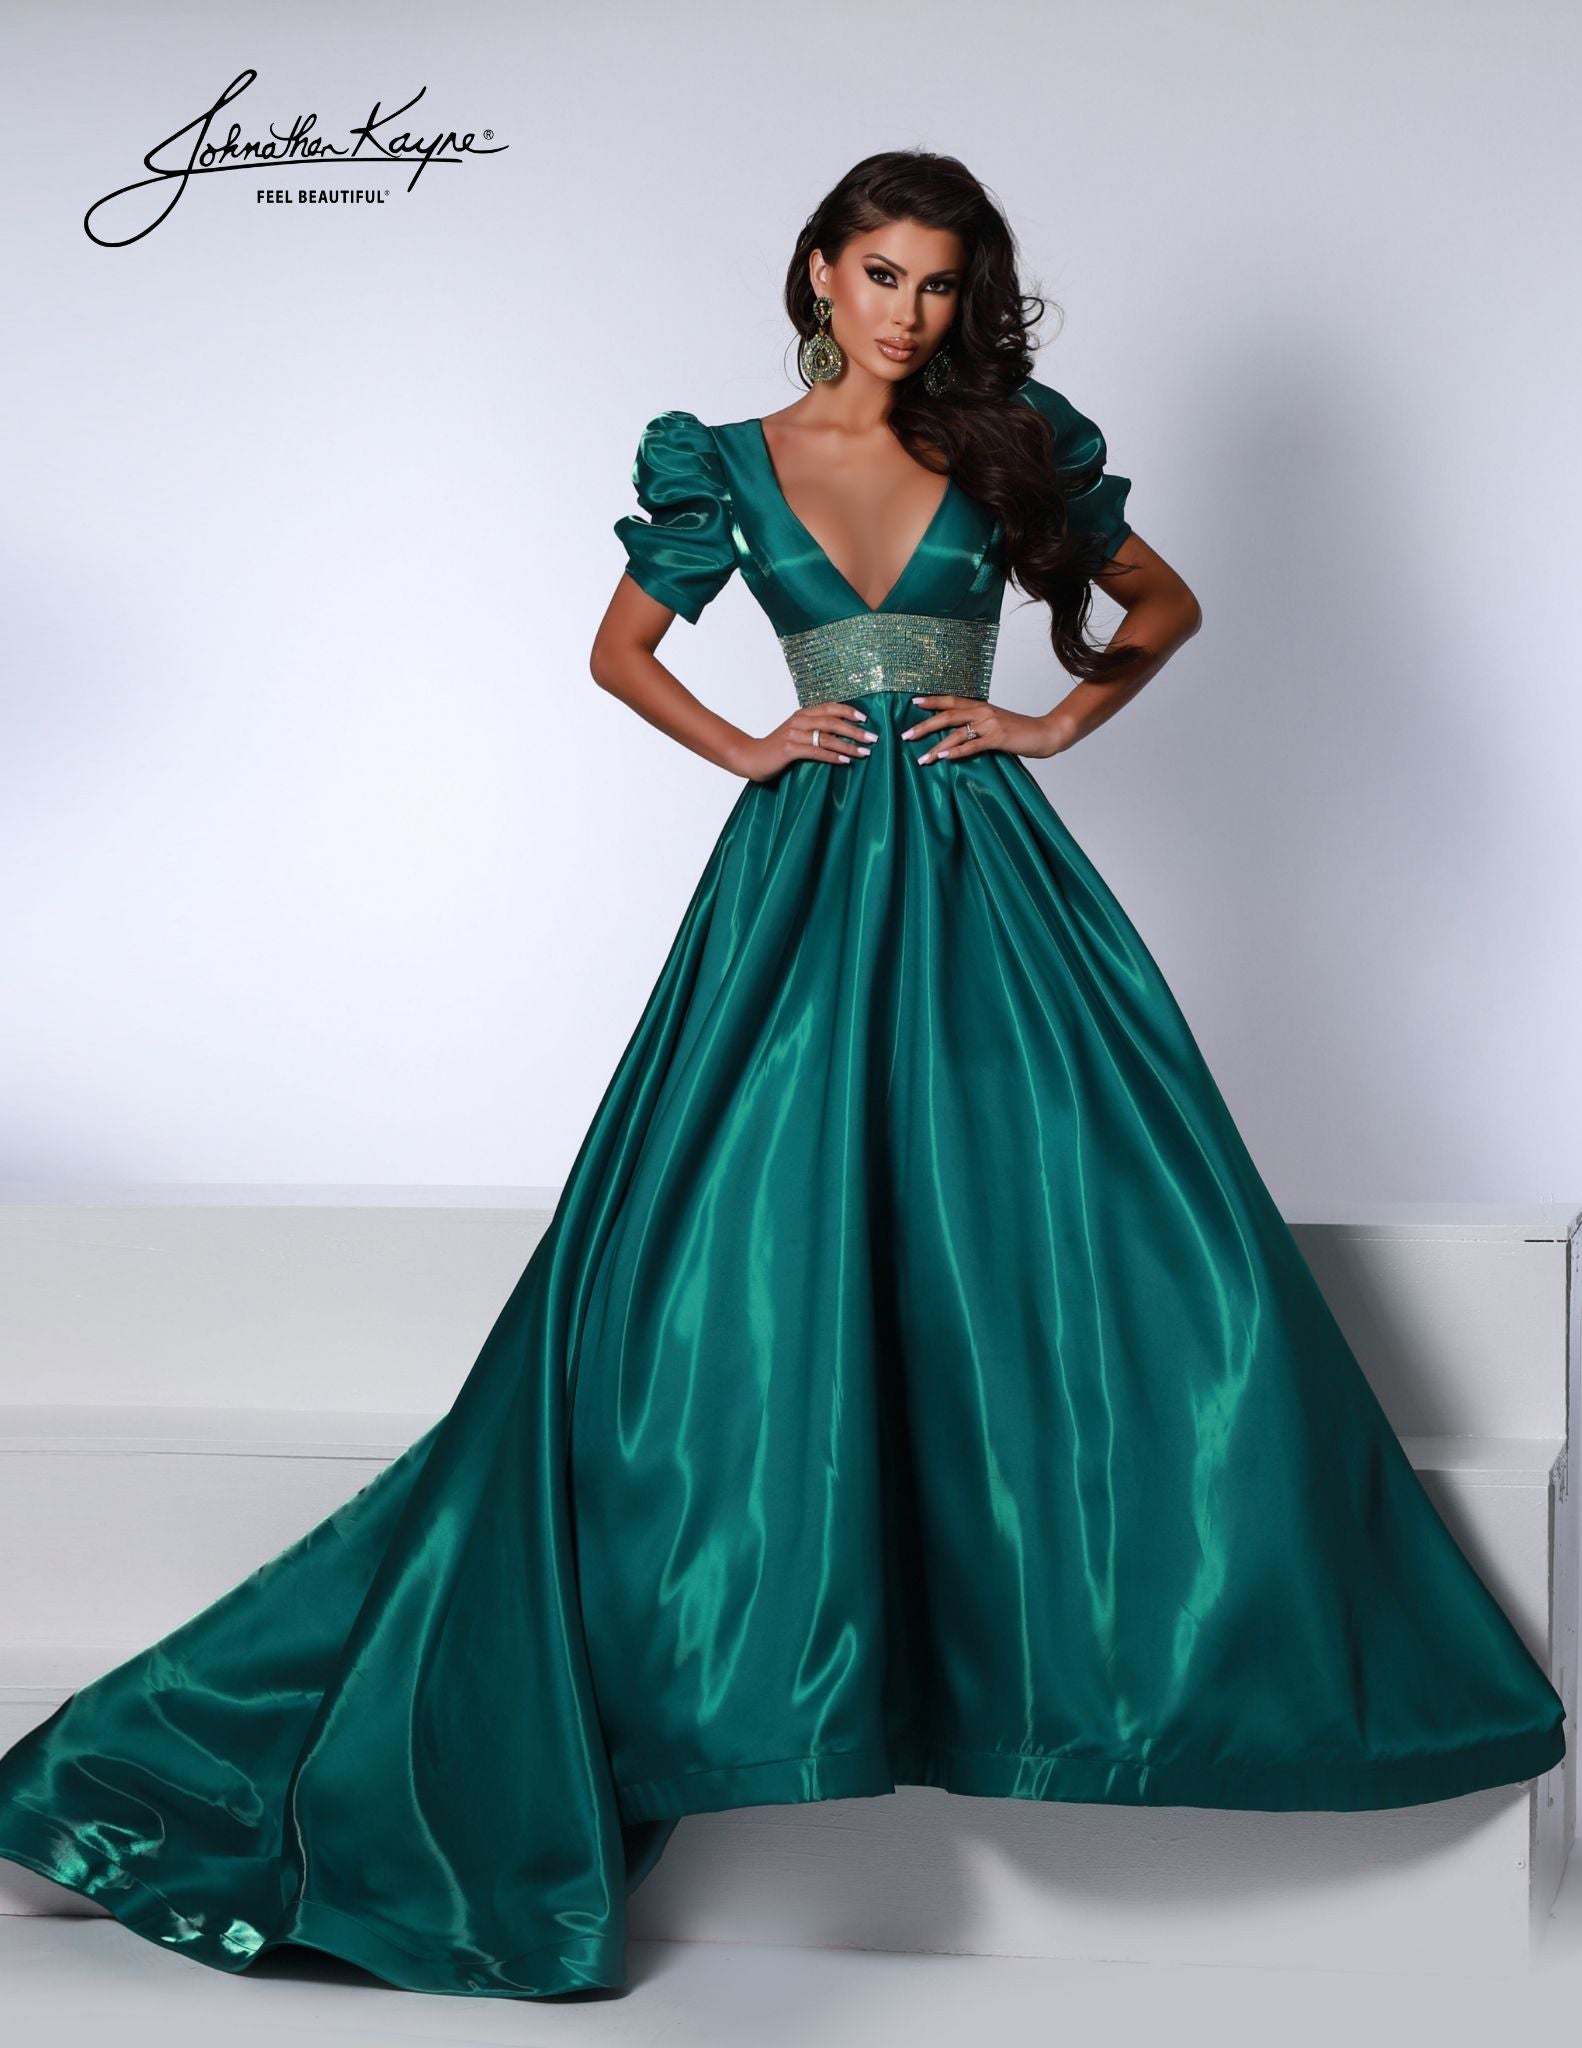 Johnathan Kayne 2692 Shimmer Satin A Line Puff Sleeve Prom Dress Crystal Waist Pageant Gown One of our best sellers from the fall, but LONG! This shimmer satin gown has puff sleeves and a V-neck bodice with a thick crystal trim waist band. Did we mention it has pockets?  Sizes: 00-24  Colors: Aqua, Cherry, Black, White, Emerald 